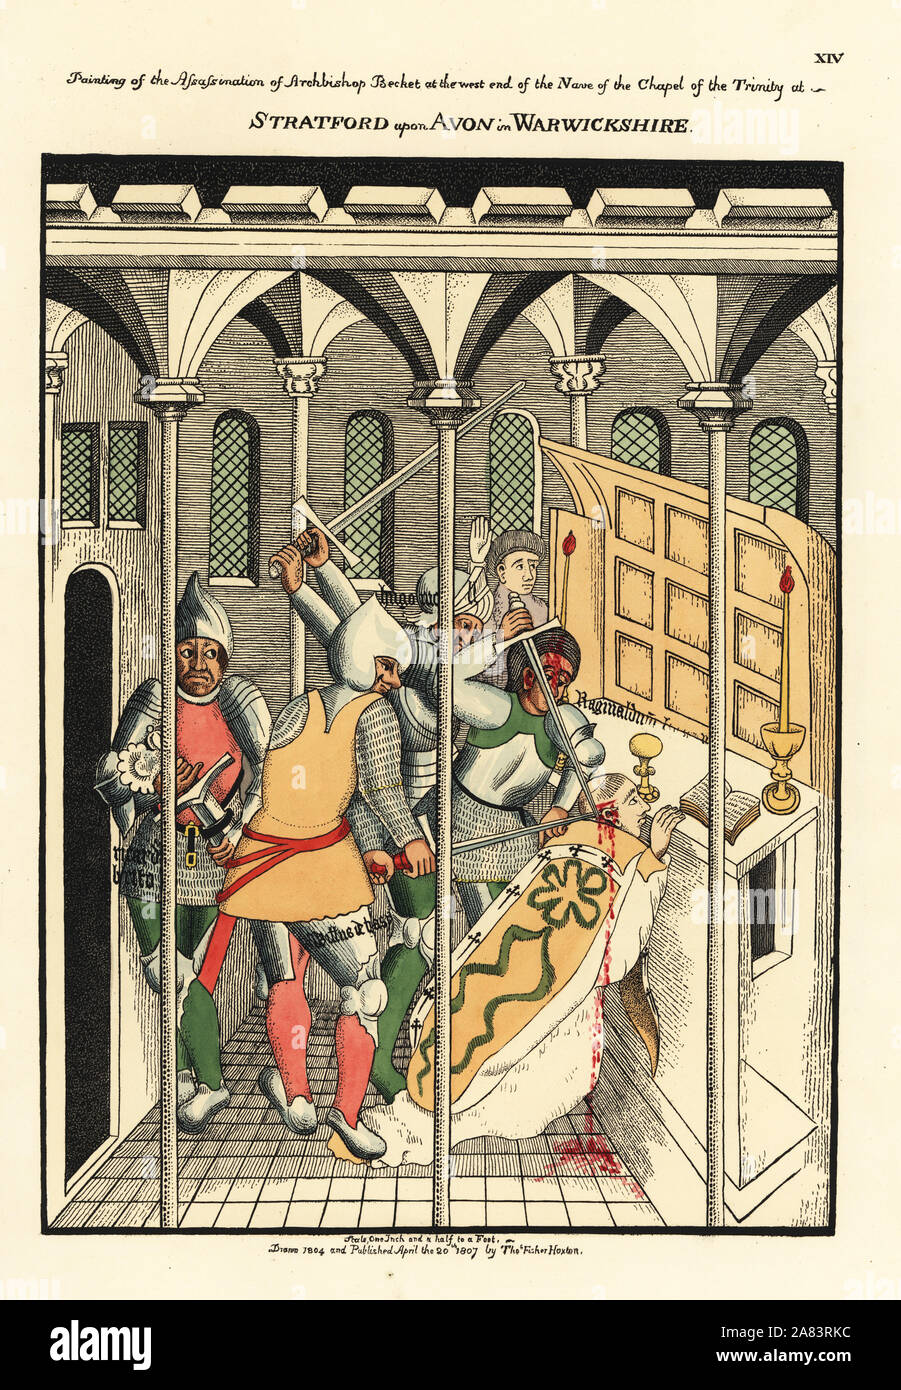 The murder of St. Thomas a Becket at Canterbury by the knights William de Tracy, Reginald Fitzurse, Hugh Morville and Richard Brito. Handcoloured etching drawn and etched by Thomas Fisher from his Paintings on the Walls of the Chapel of the Trinity, Stratford upon Avon, 1808. Stock Photo